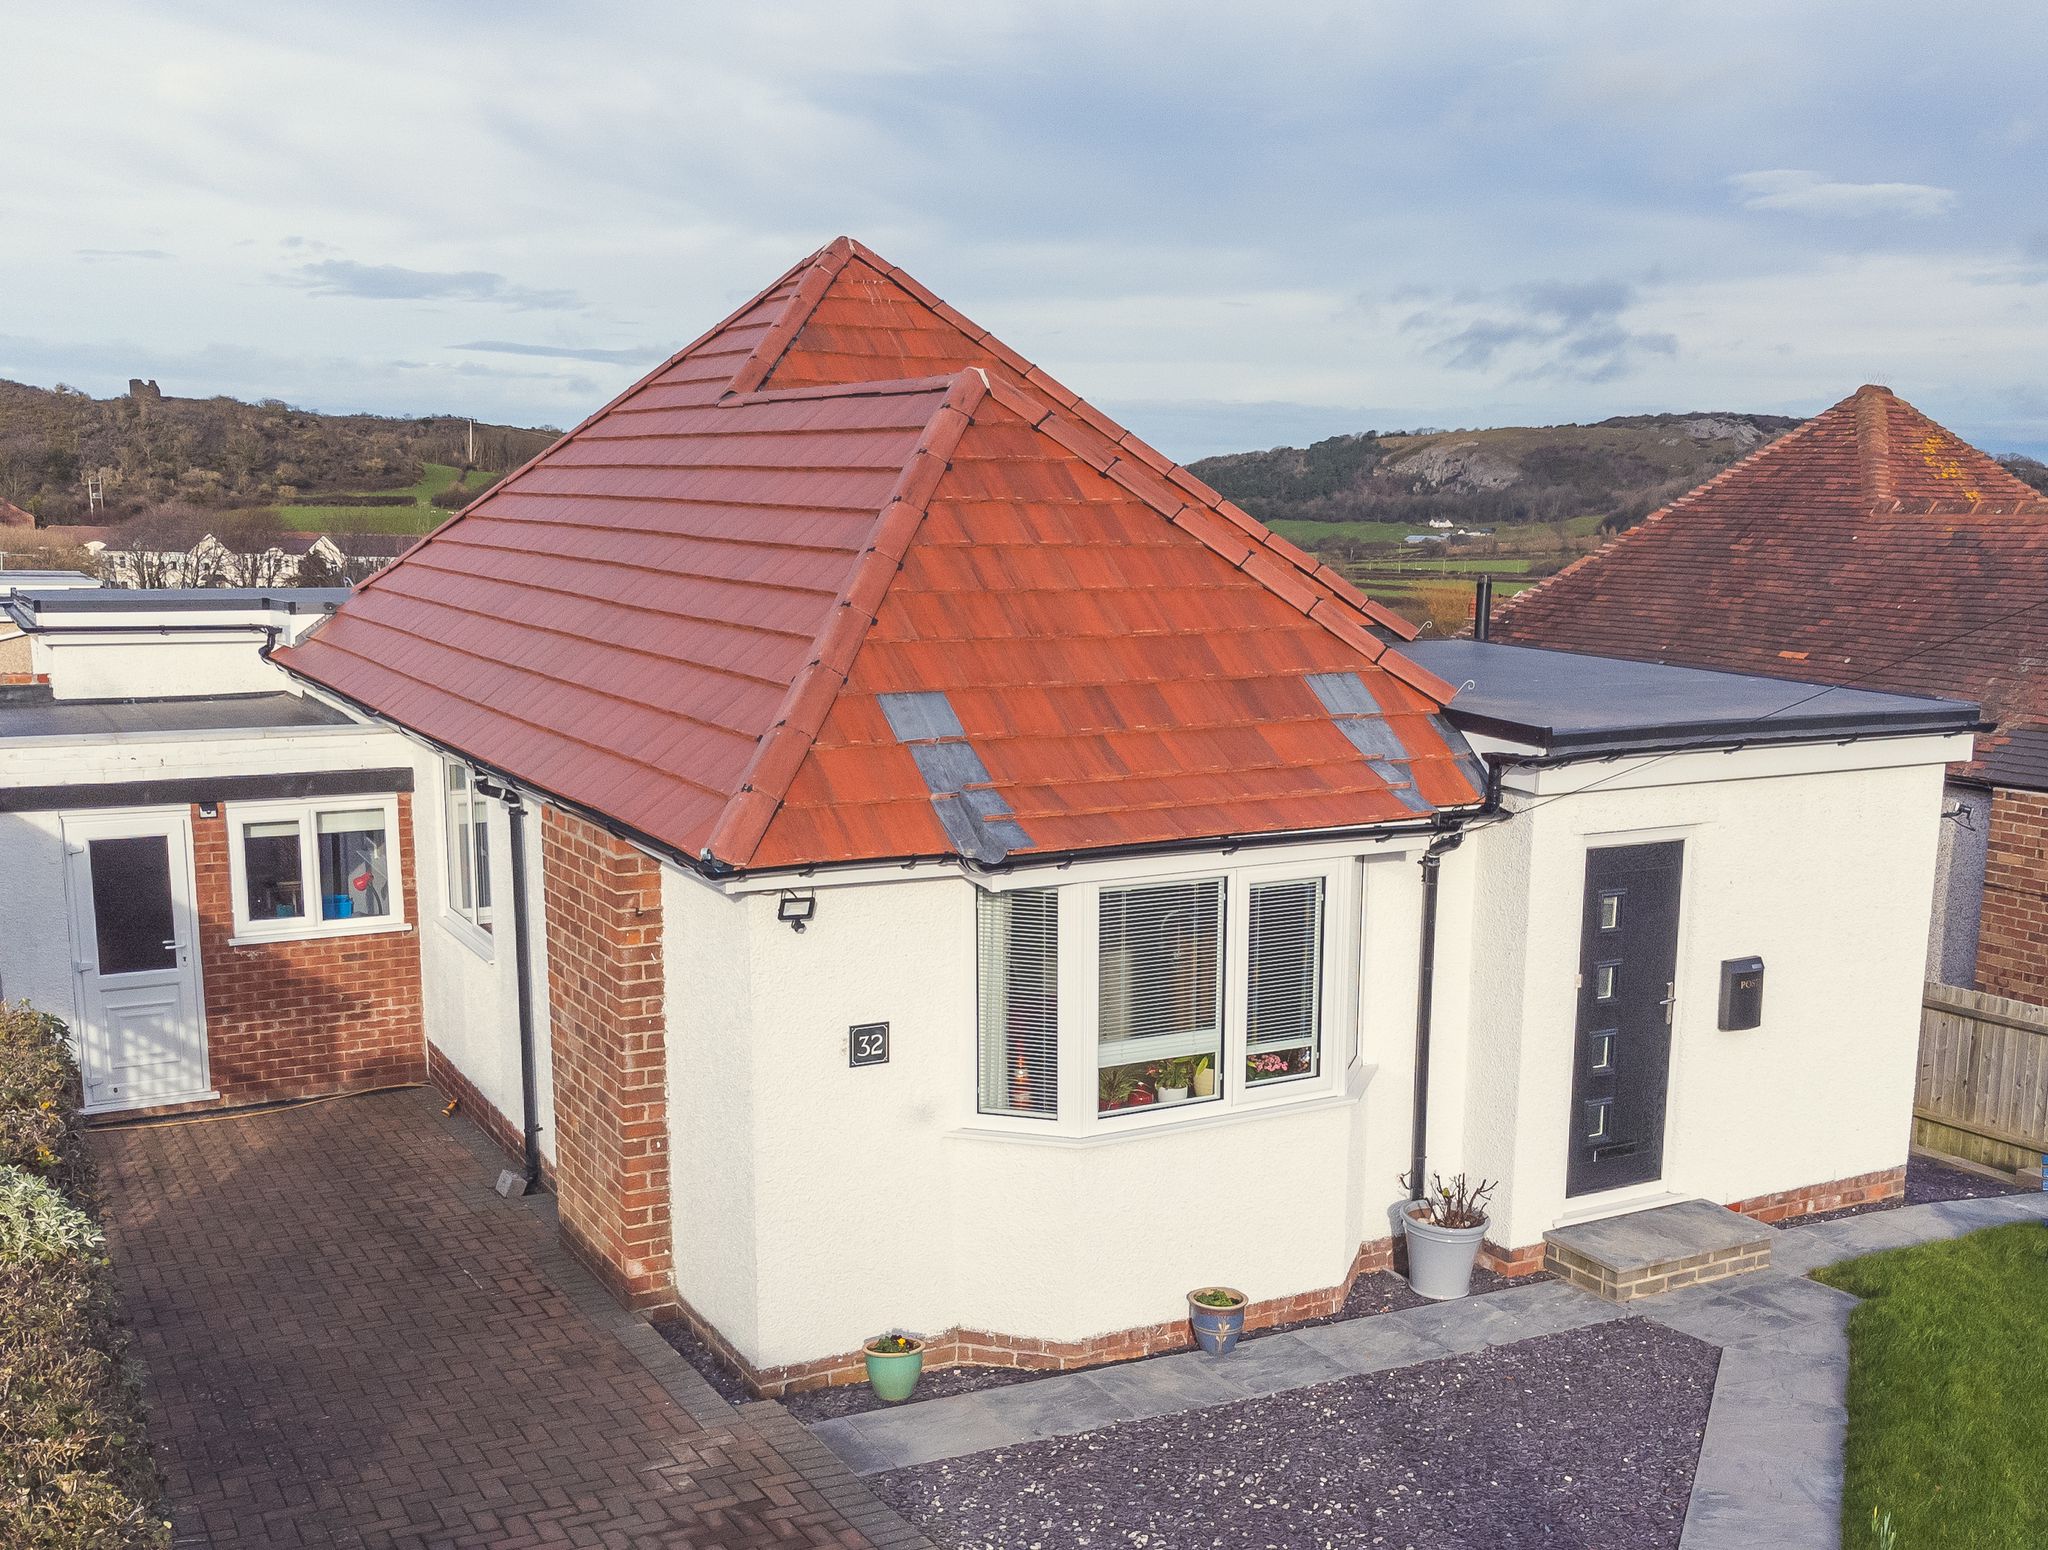 Tile Roof Contractors Tan-y-fron, LL16 - DD Roofing